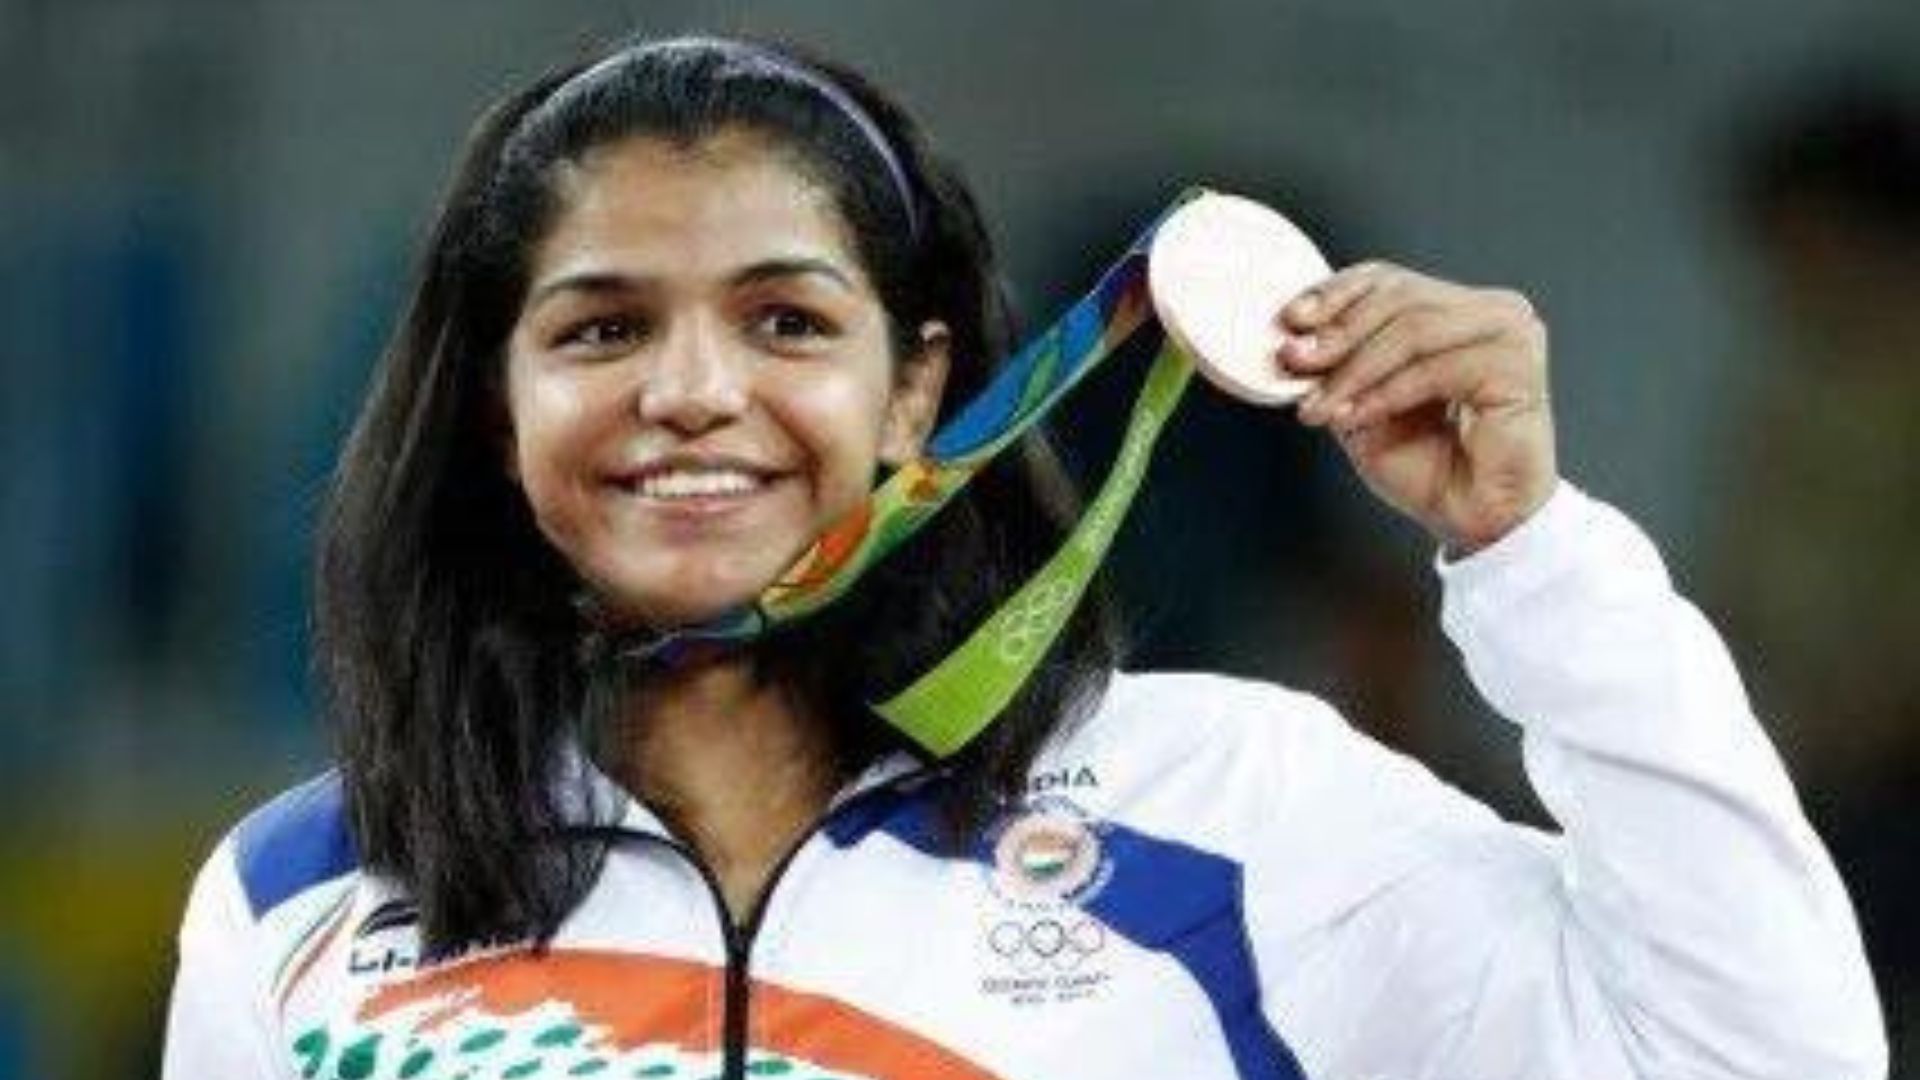 Sakshi Malik with the bronze medal at the Rio Olympics 2016 (Image Credits - Twitter)